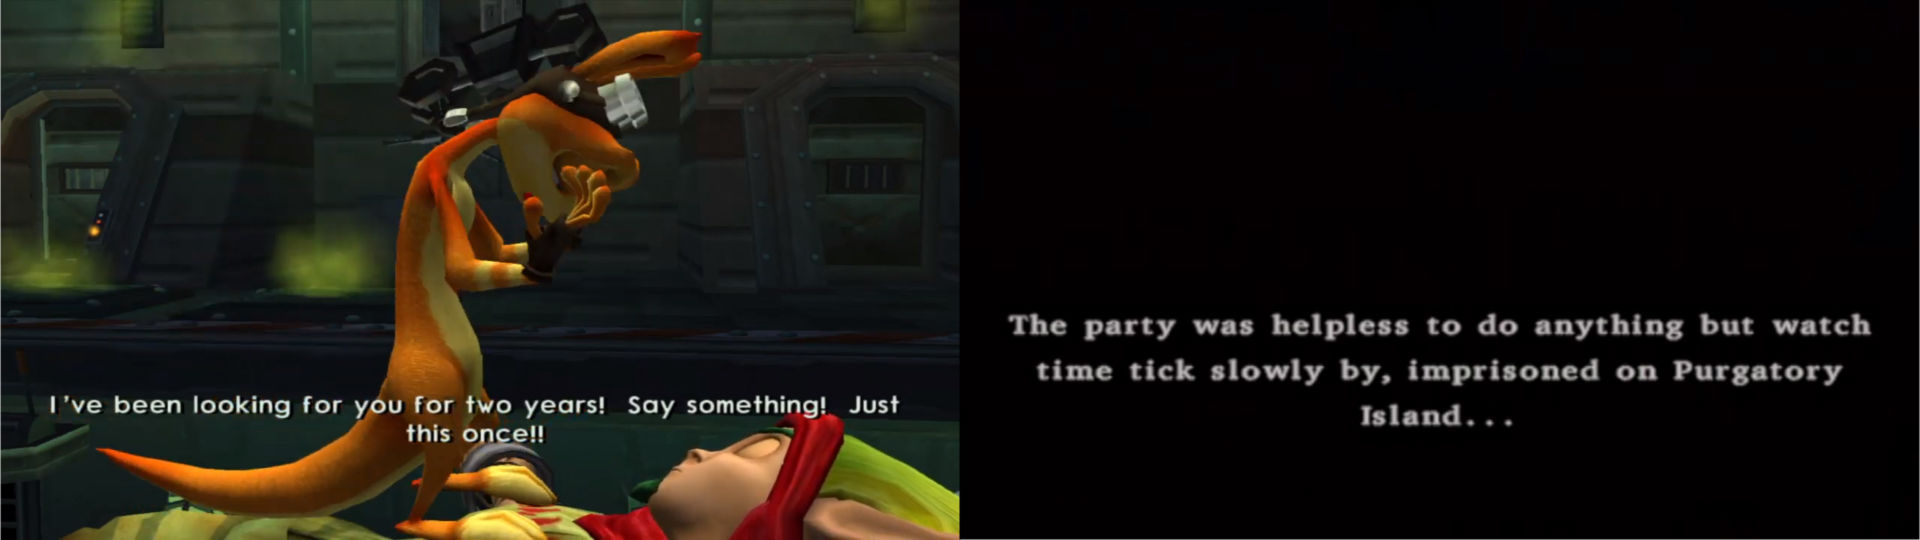 Images from Jak II and Dragon Quest VIII, showing that time has passed while characters are in prison.